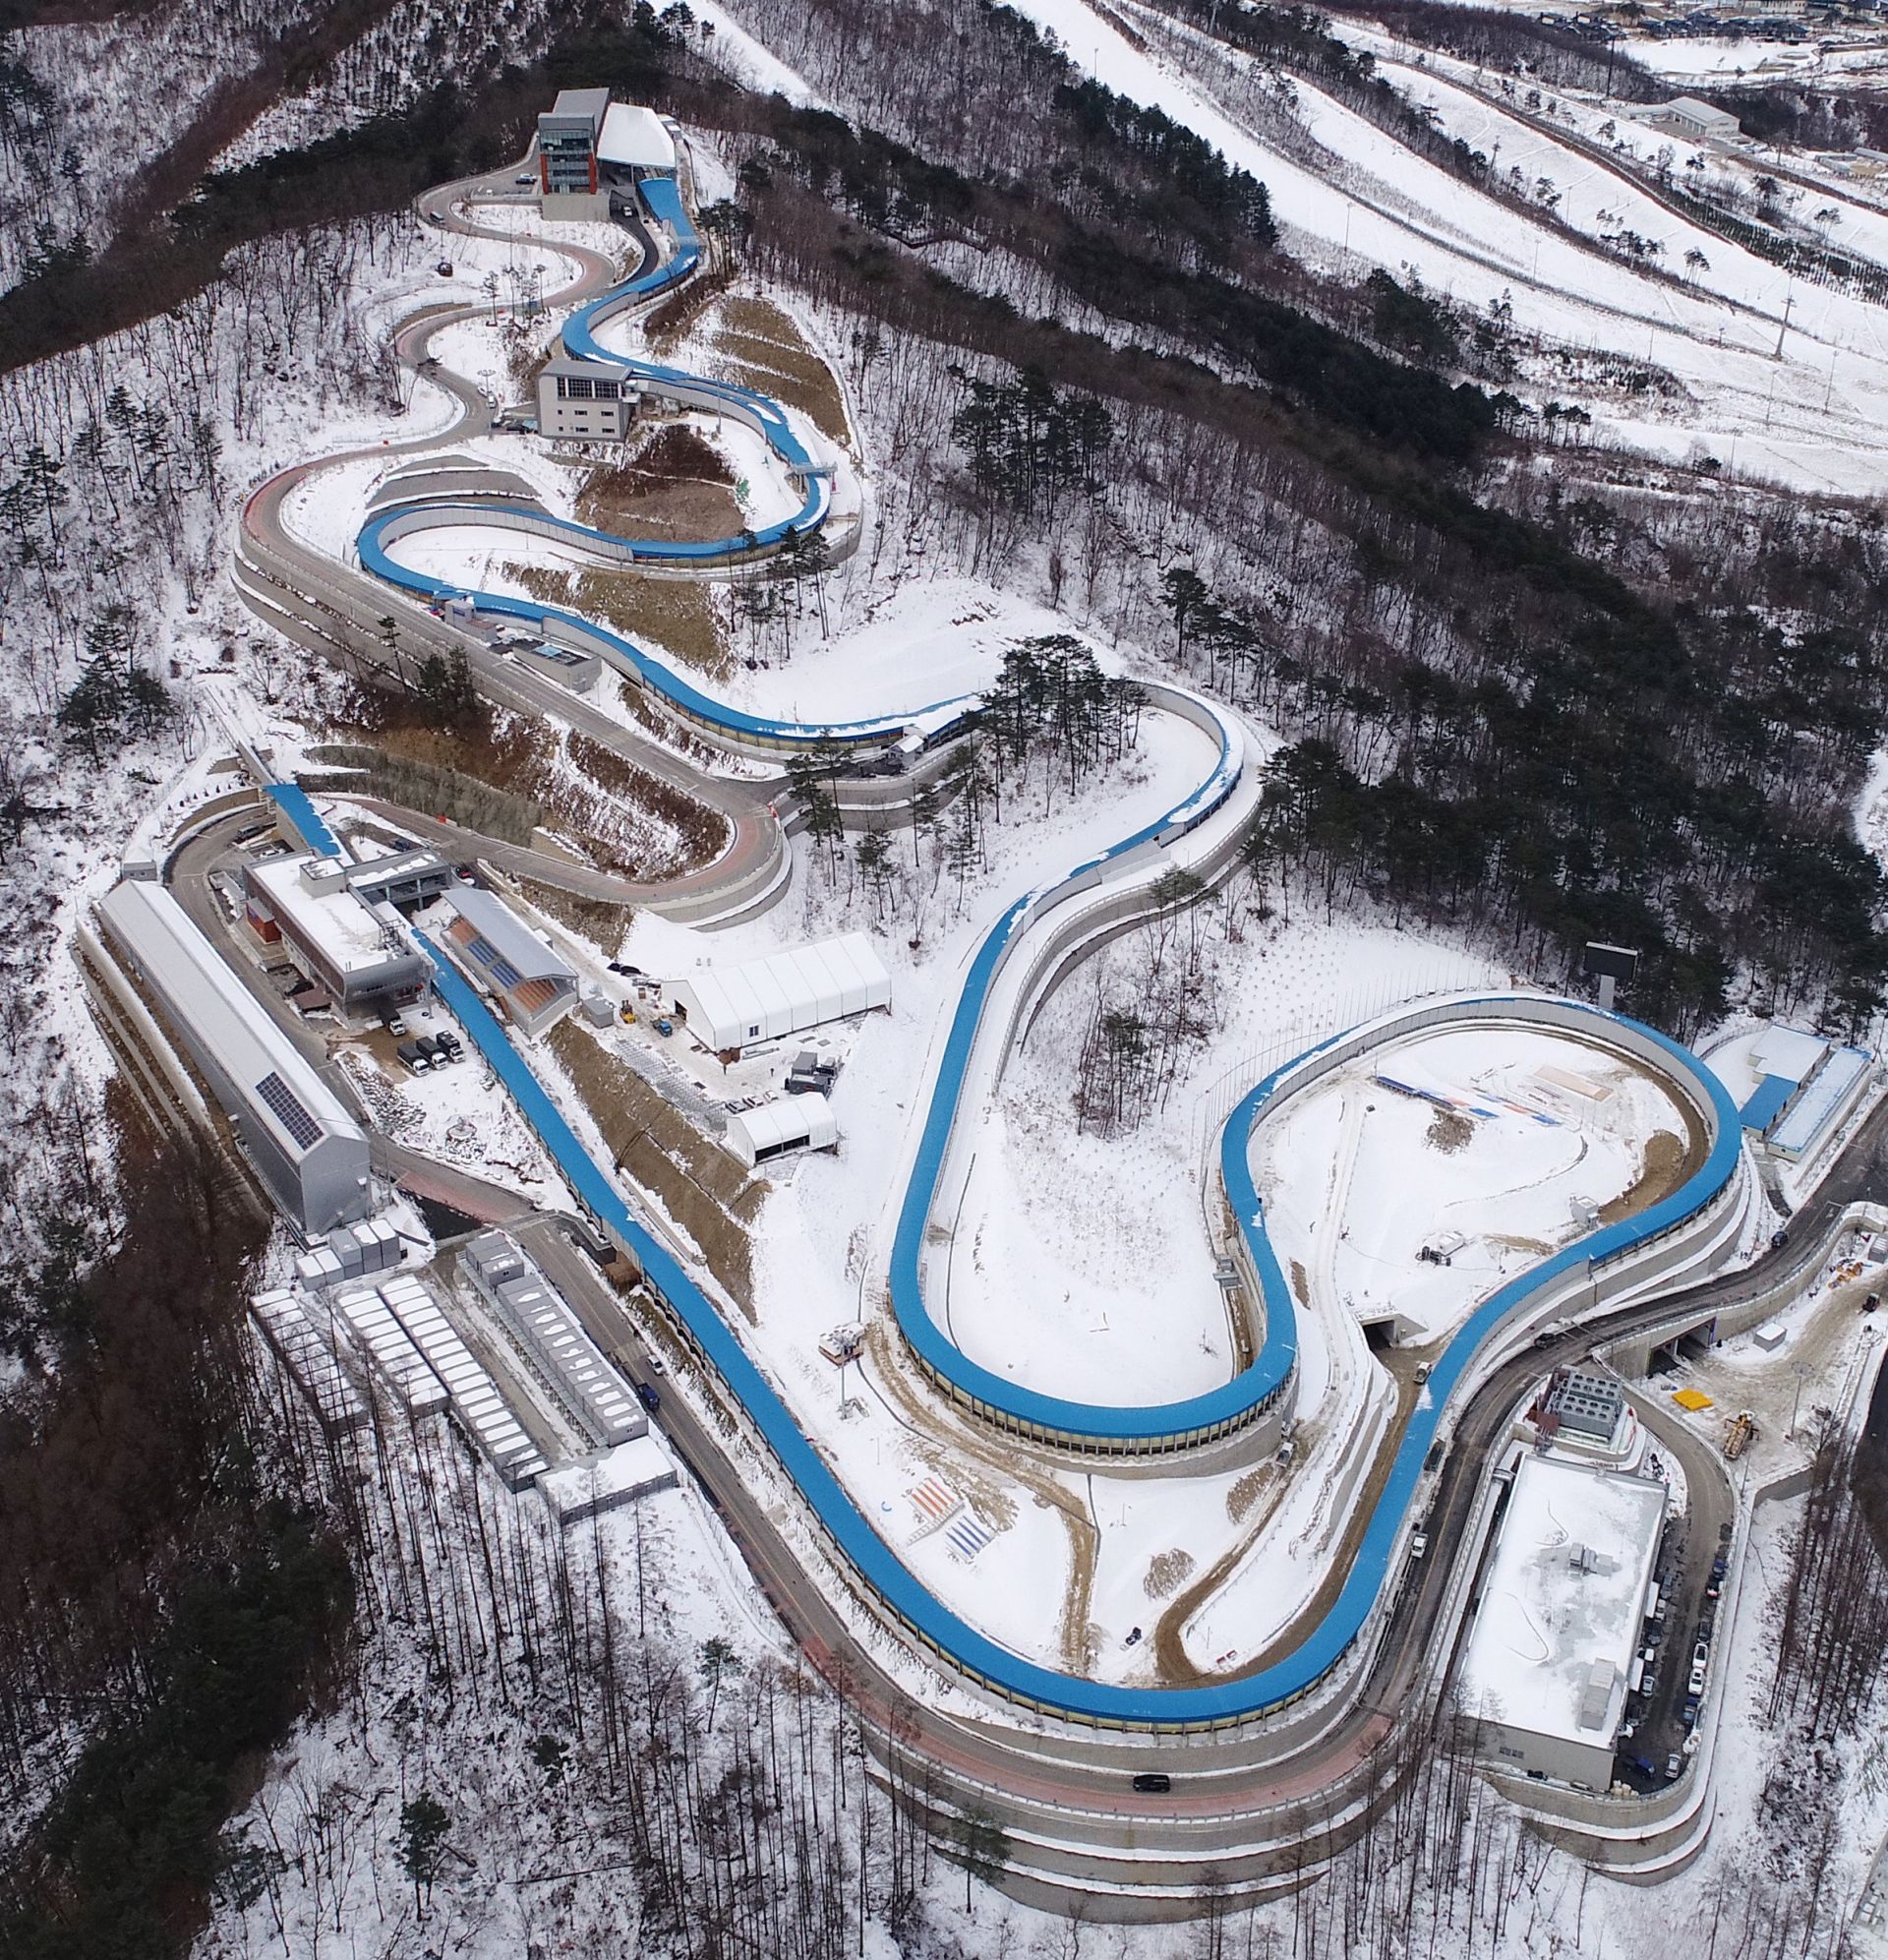 epa06391096 An aerial view shows the sliding center for the 2018 PyeongChang Winter Olympics, east of Seoul, South Korea, 15 December 2017. The venue will host the bobsled, skeleton and luge competitions during the 17-day Winter Games, during which more than 100 gold medals will be awarded in 15 sports.  EPA/YONHAP SOUTH KOREA OUT